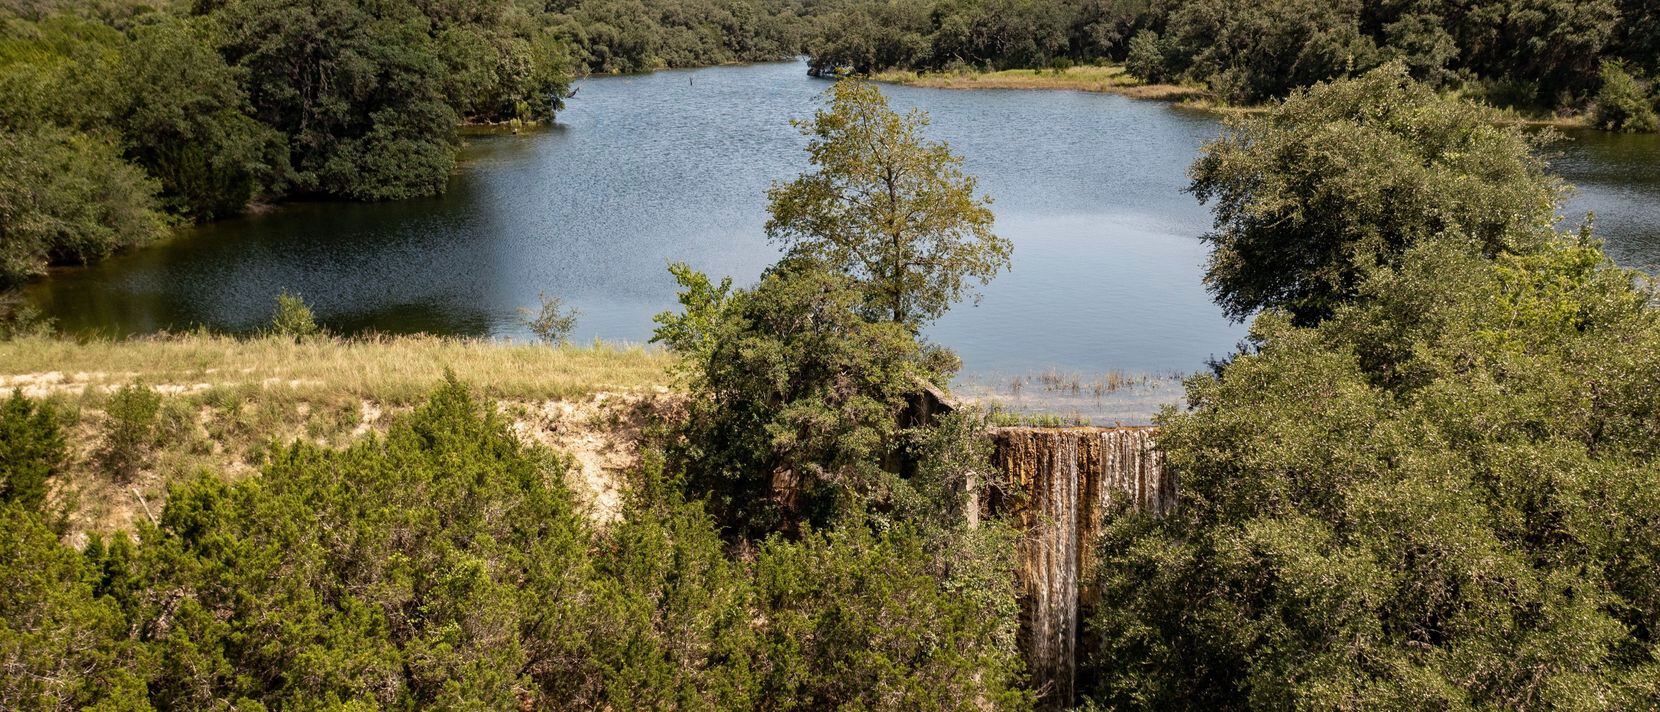 The Mt. Solitude Ranch includes small lakes and streams in Bexar County.